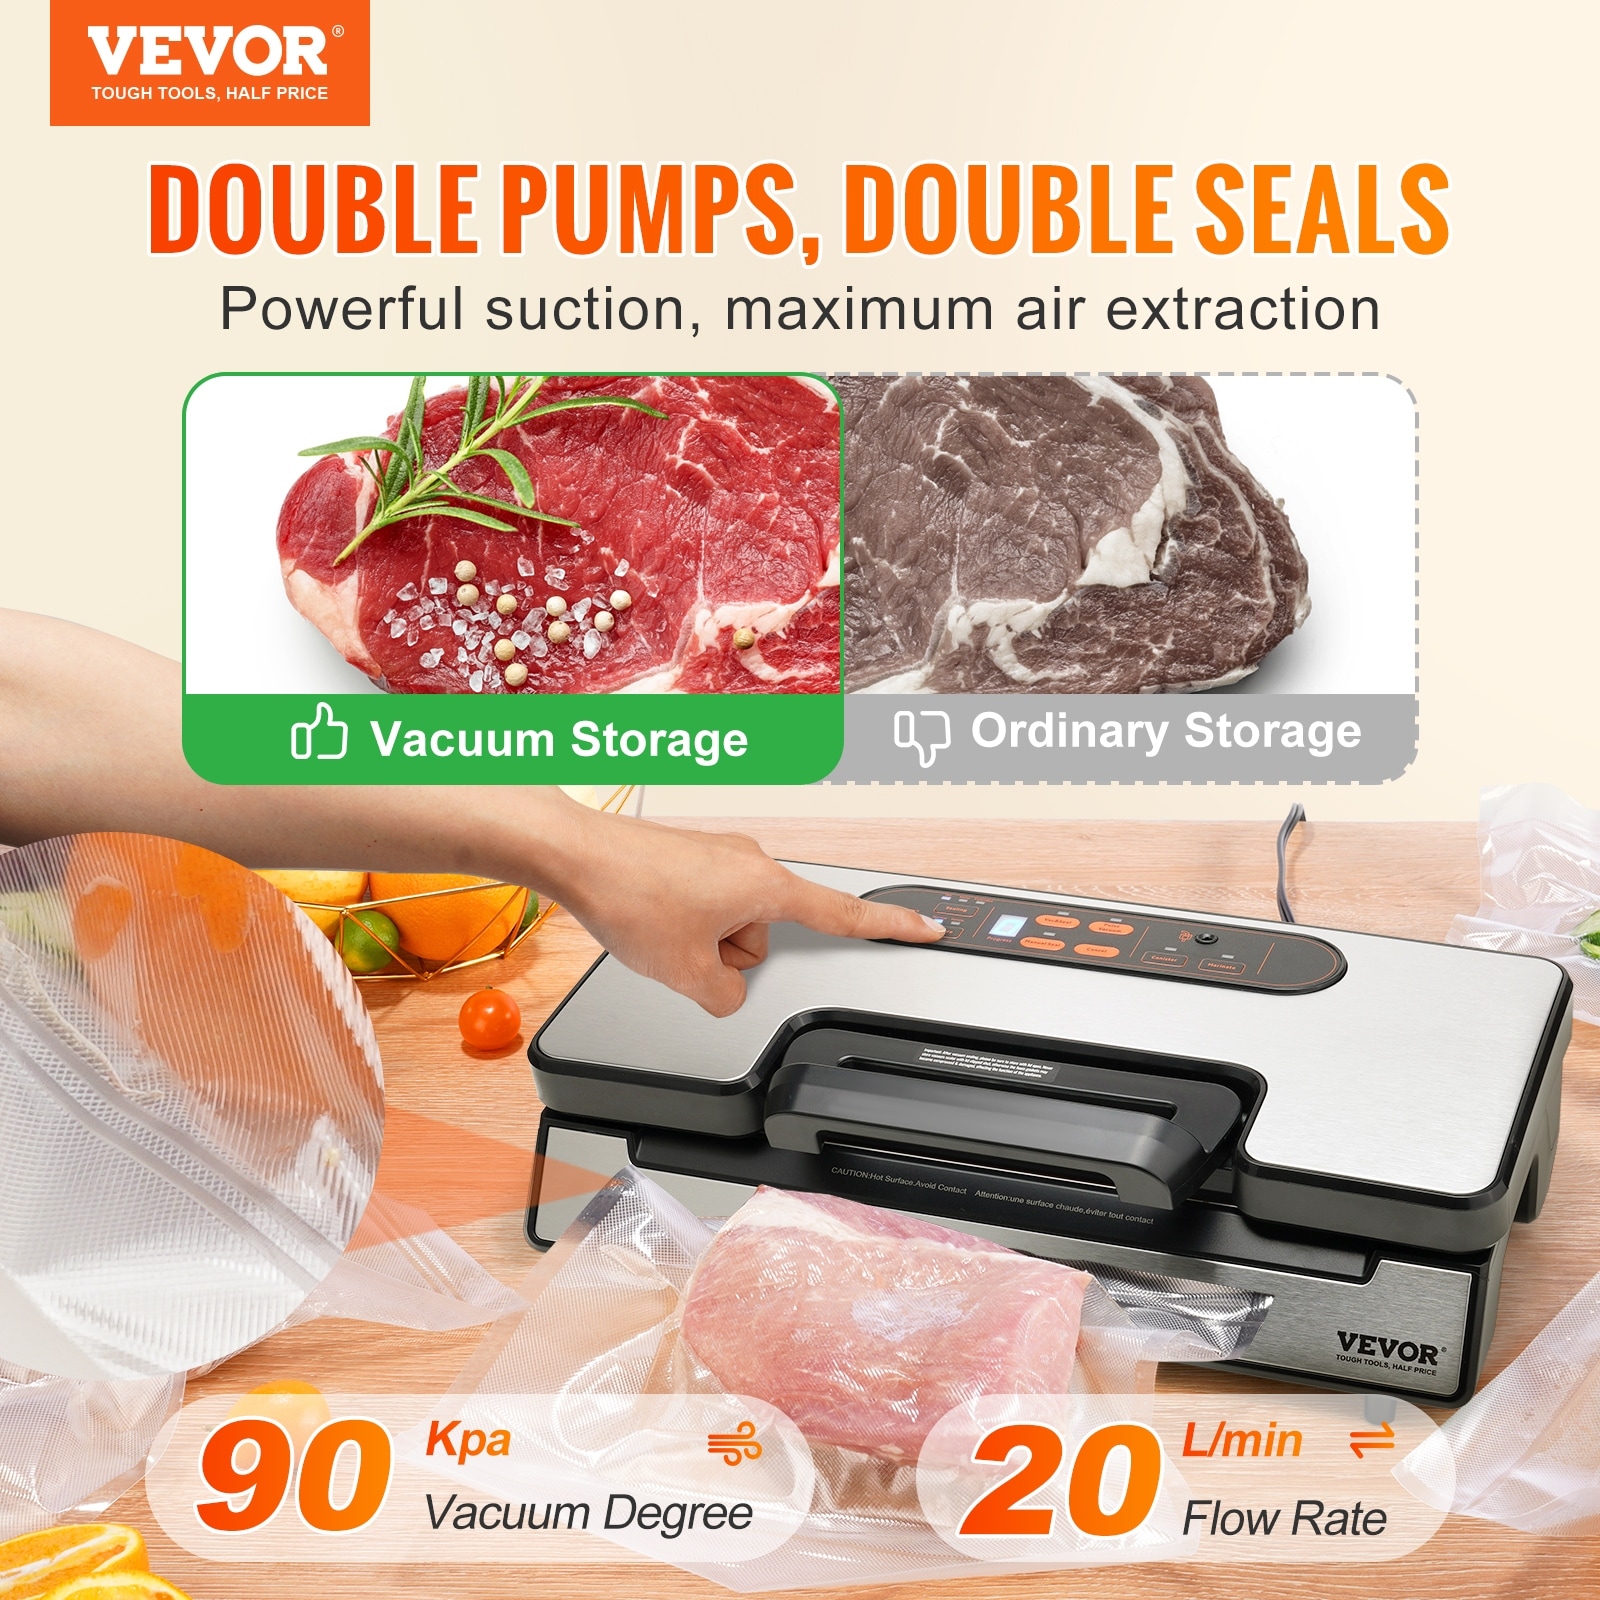 Automatic Food Vacuum Sealer Machine Built in Air Sealing System W/ Normal  & Moist & Gentle 3 Food Modes with 10Pcs Vacuum Seal Bags 